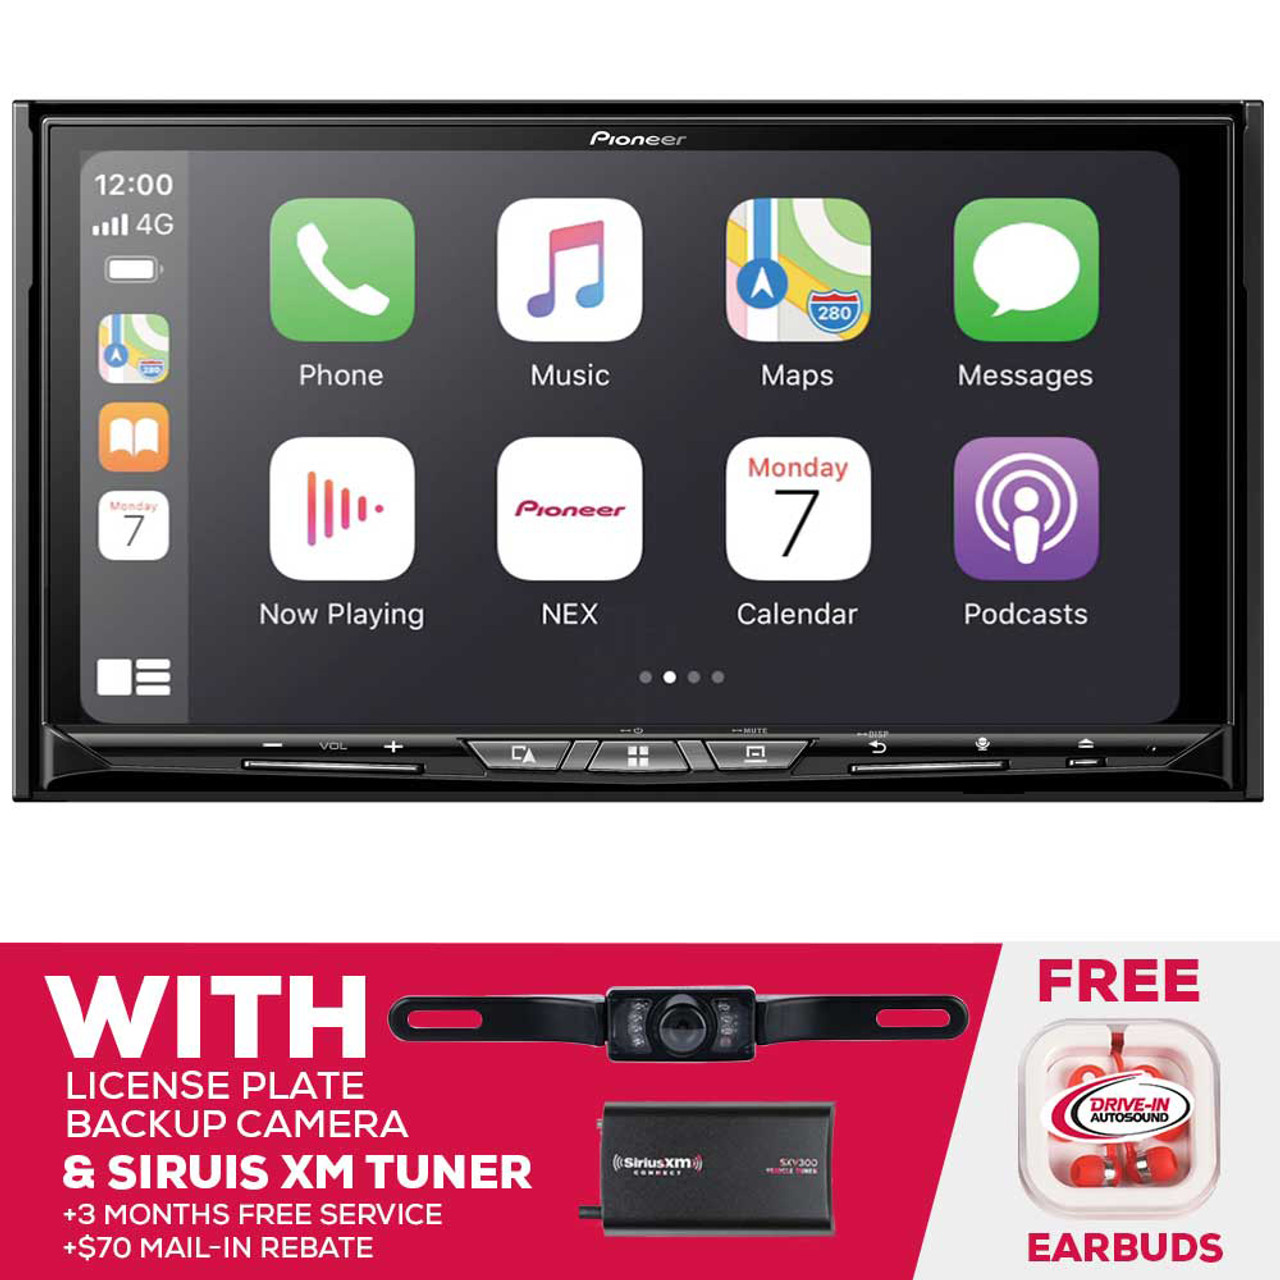 Pioneer AVIC-W8600NEX In-Dash Navigation AV Receiver with 6.94” WVGA Capacitive Touchscreen